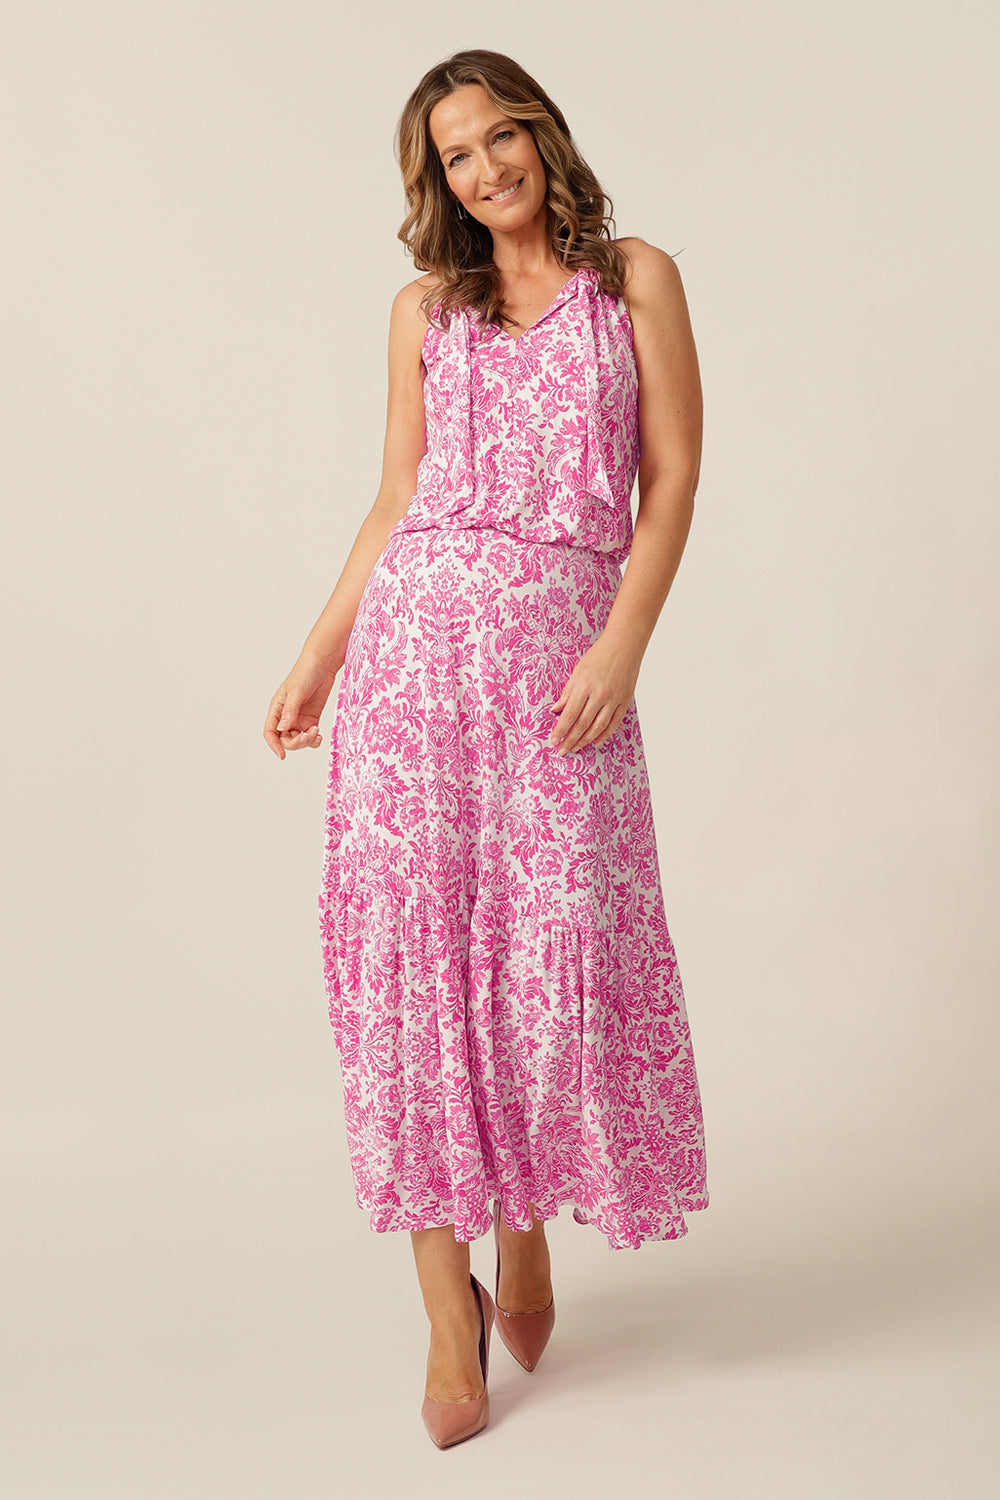 model wearing white and pink patterned maxi dress that draws in at the waist 